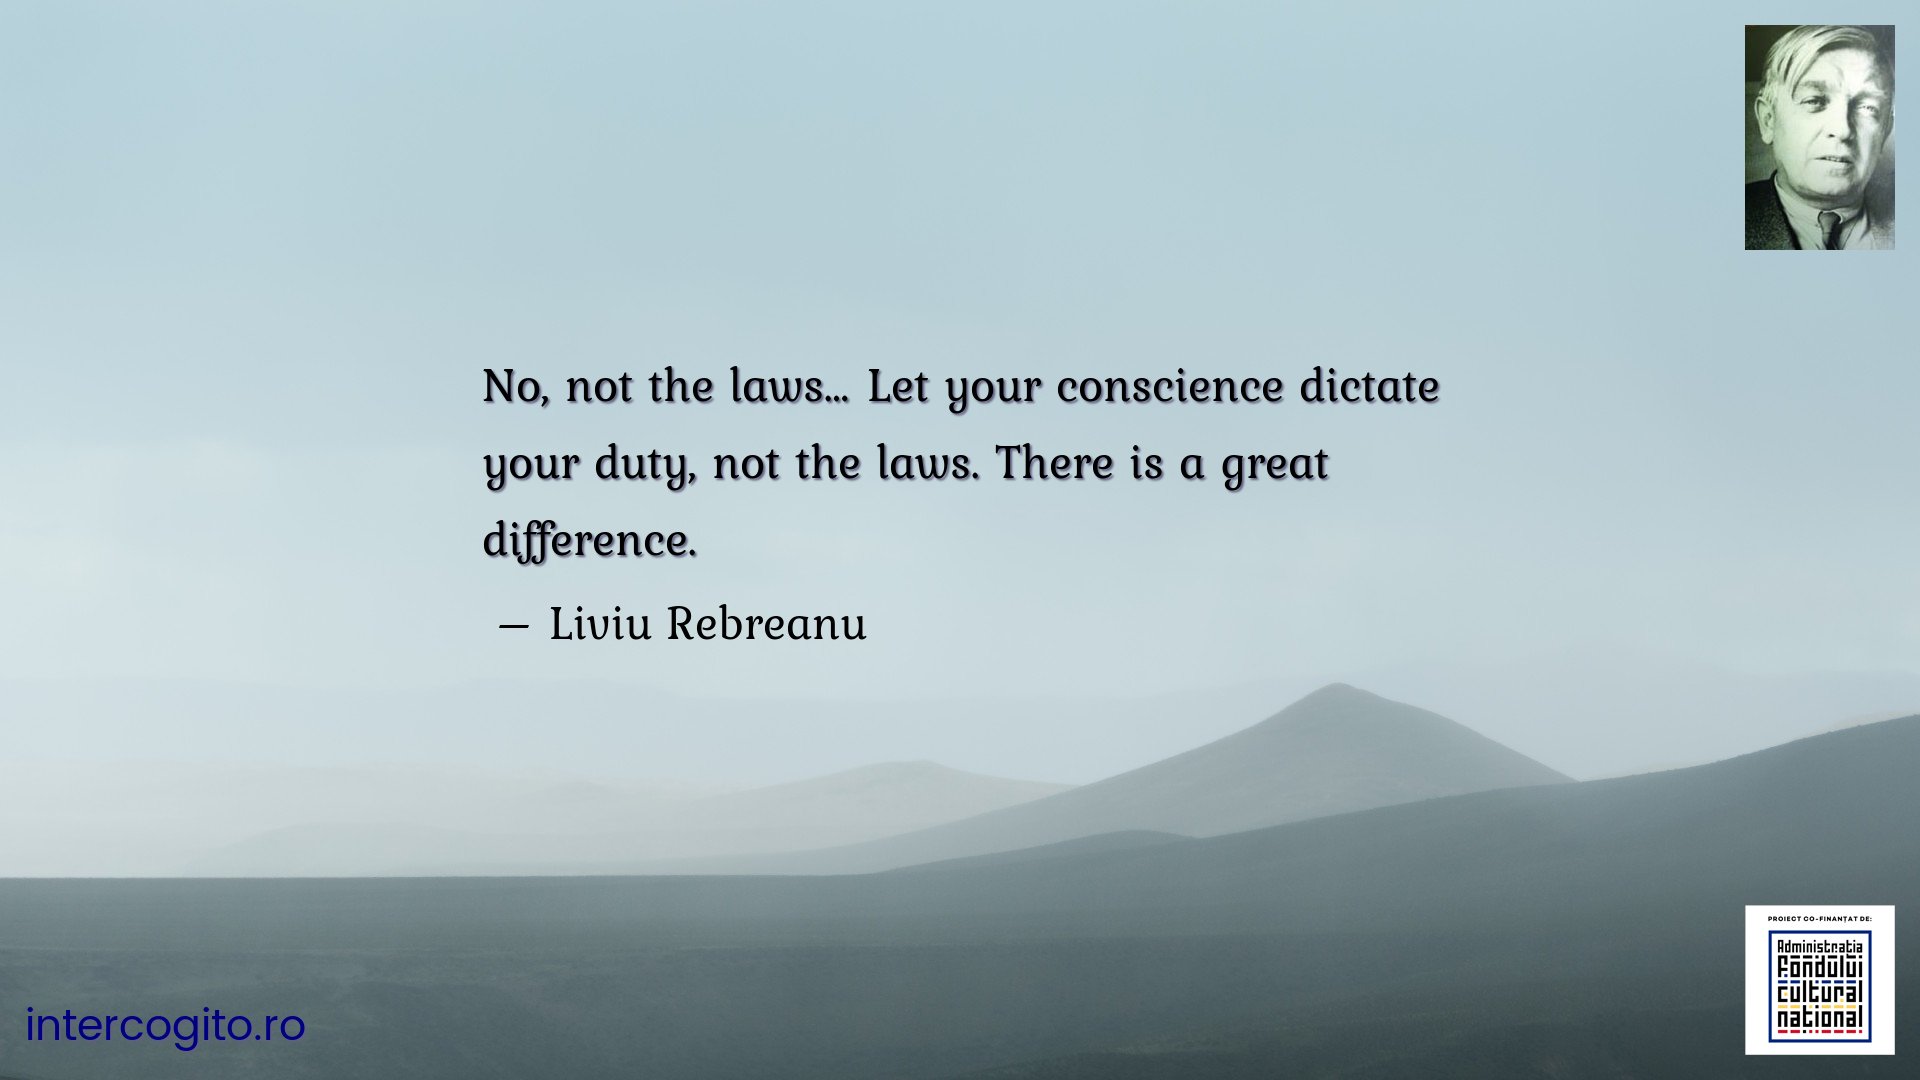 No, not the laws… Let your conscience dictate your duty, not the laws. There is a great difference.